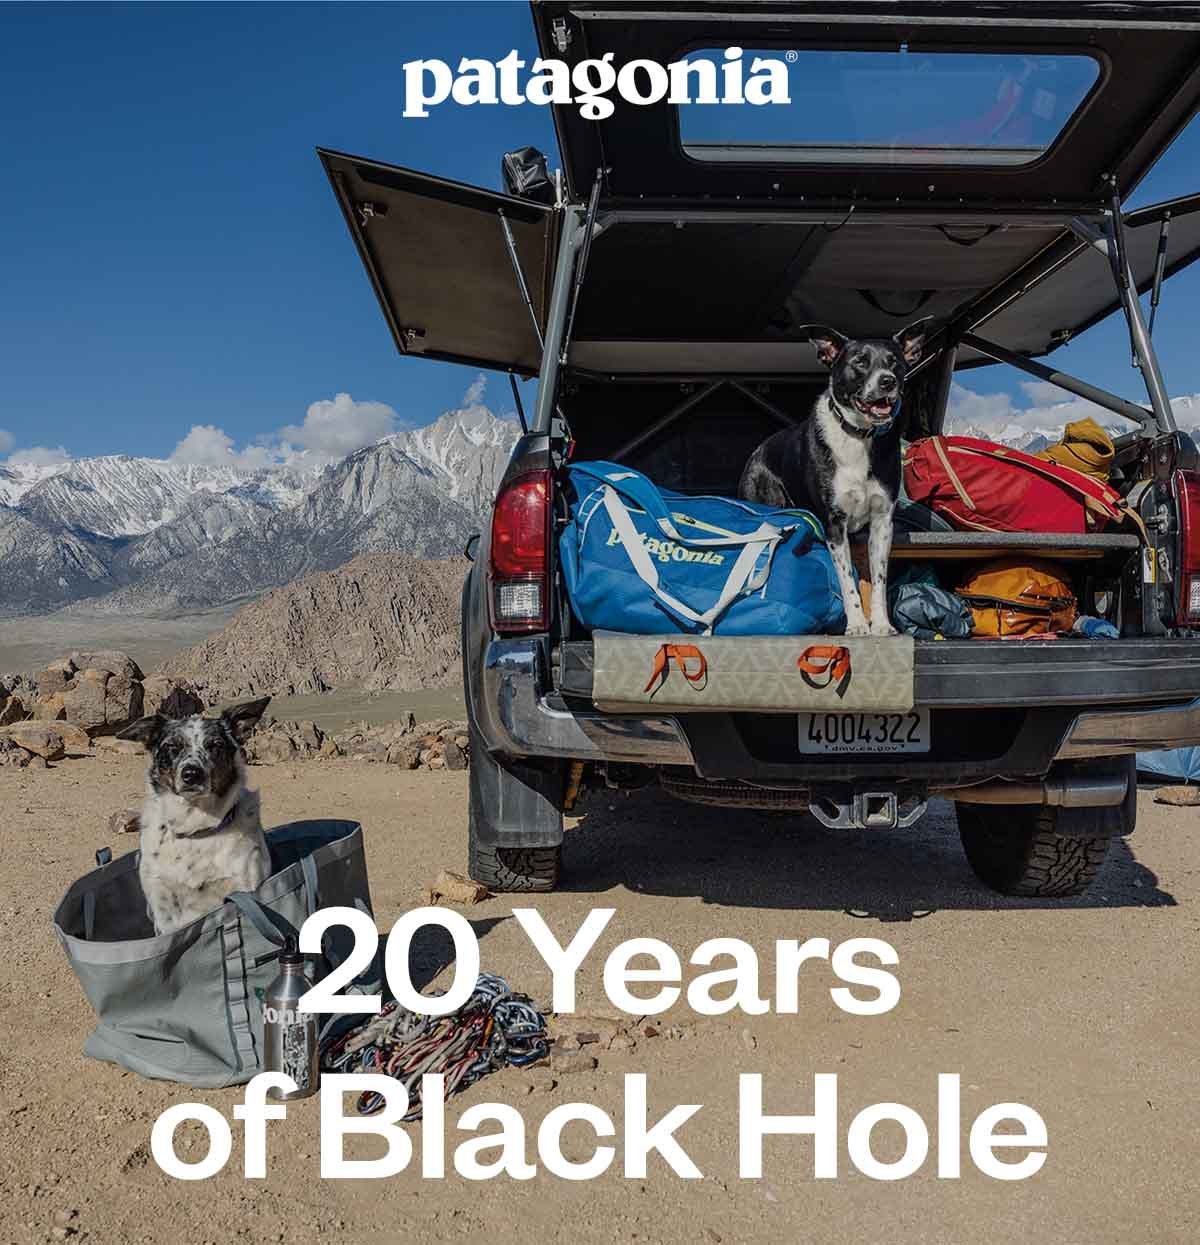 20 years of Black Hole. Two dogs and a bunch of gear bags at a dusty campsite. 